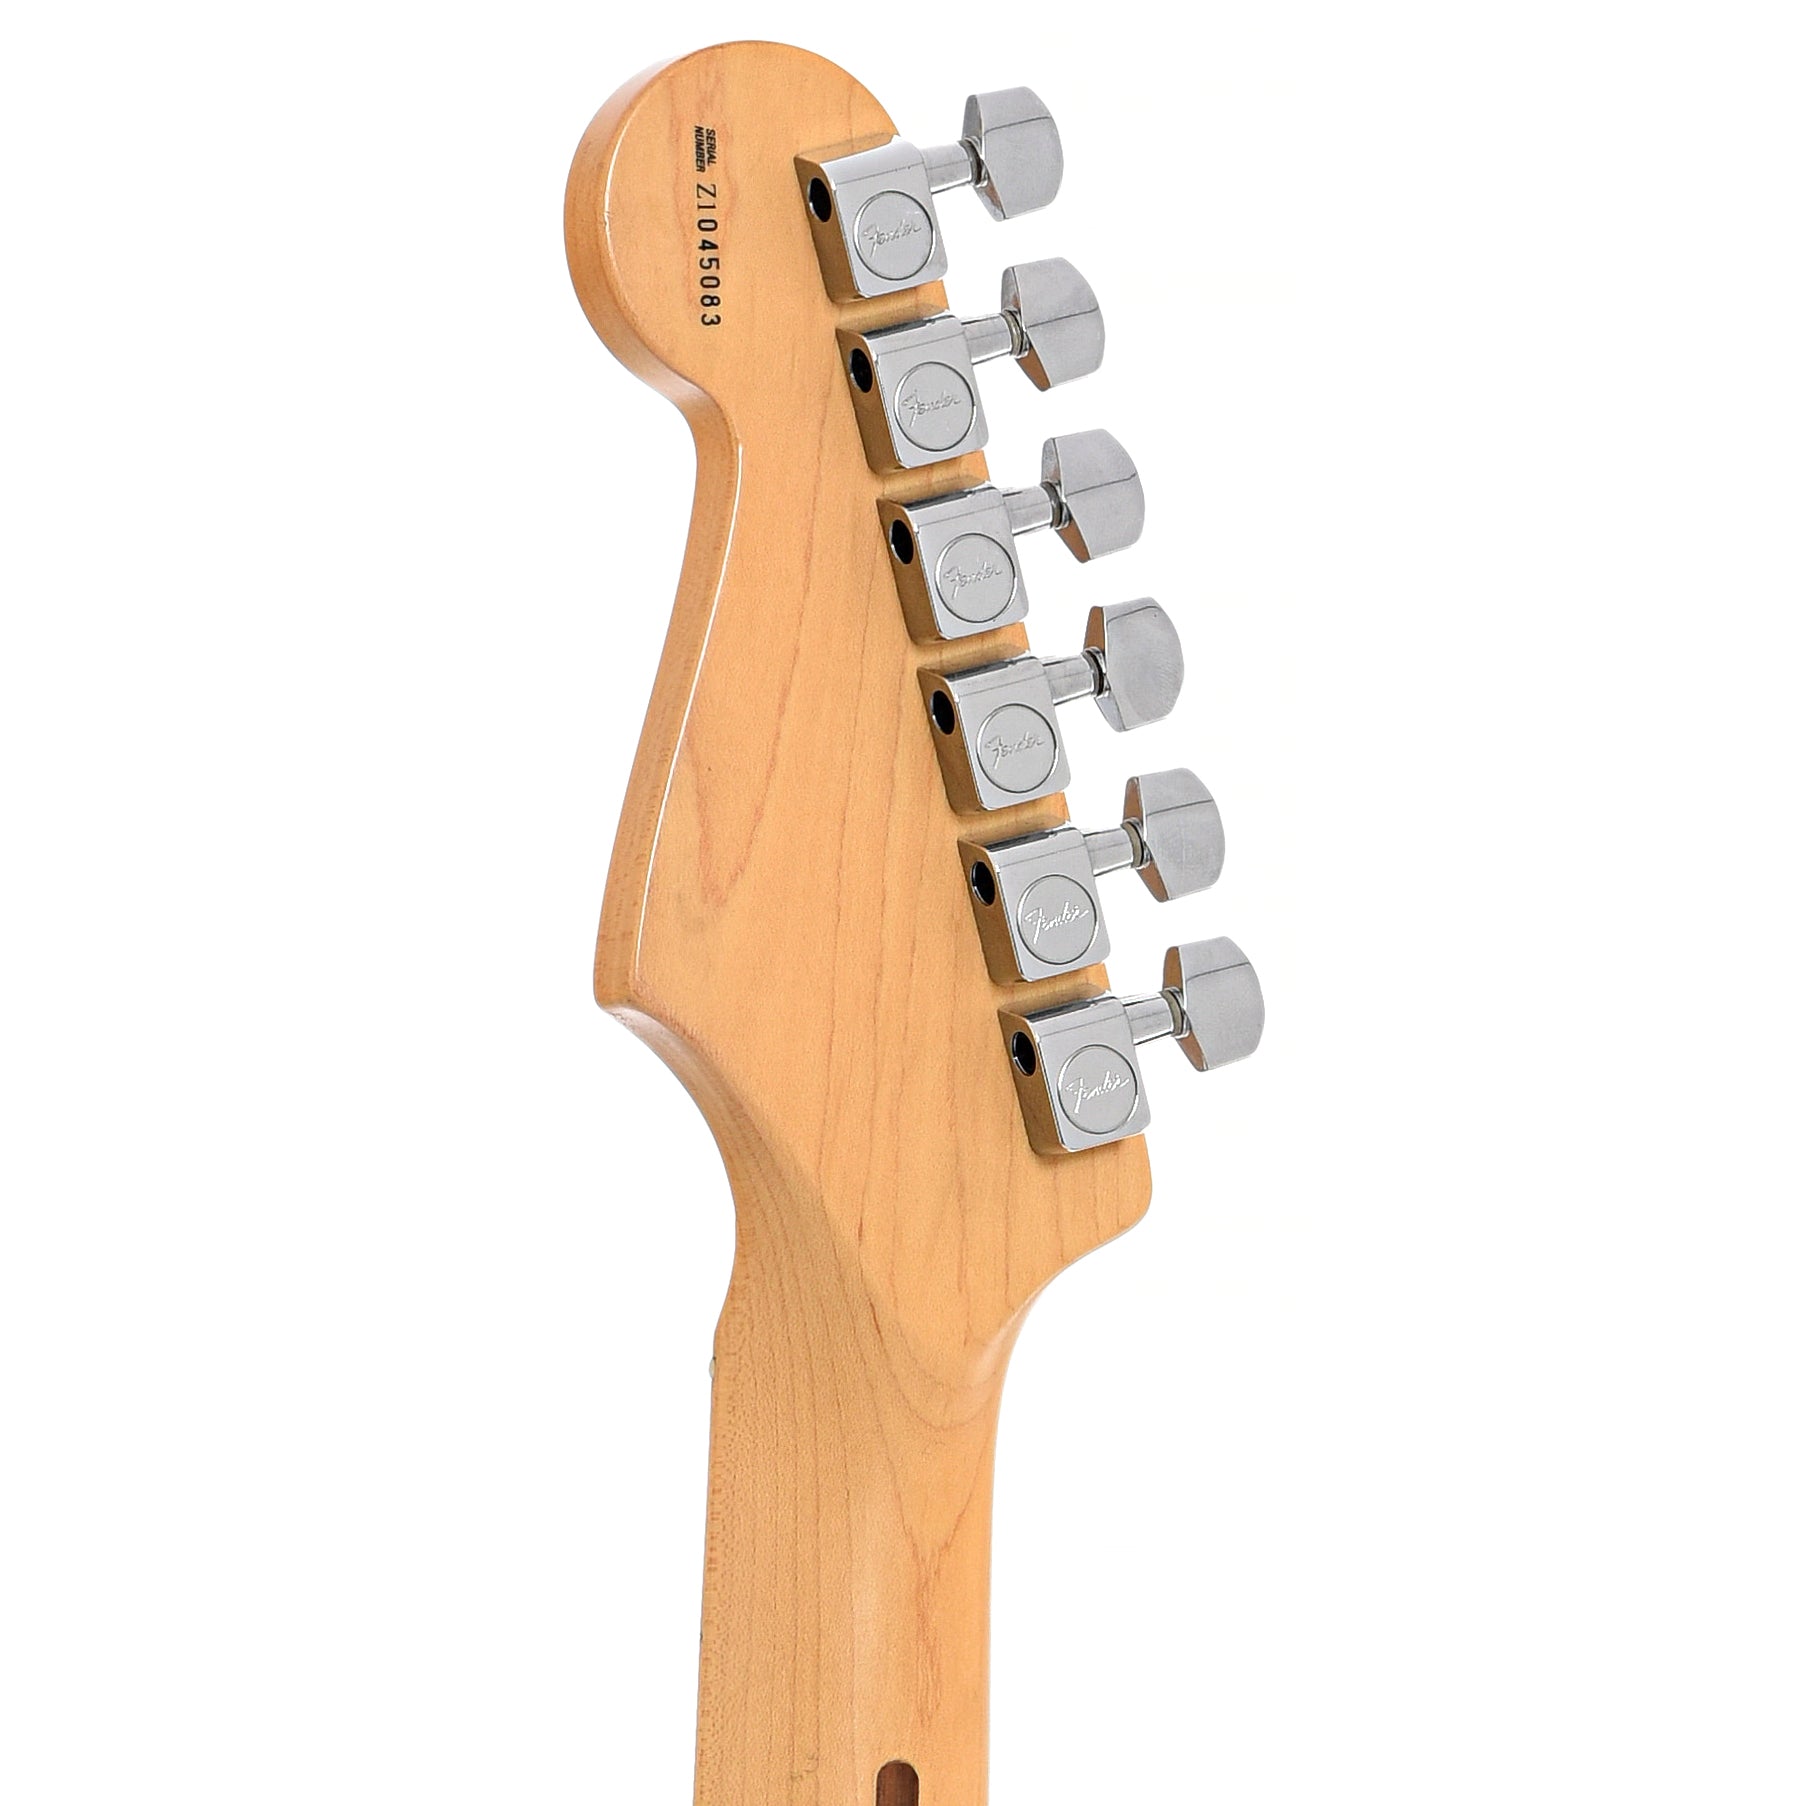 BAck headstock of Fender American Series Stratocaster Electric Guitar (2001)